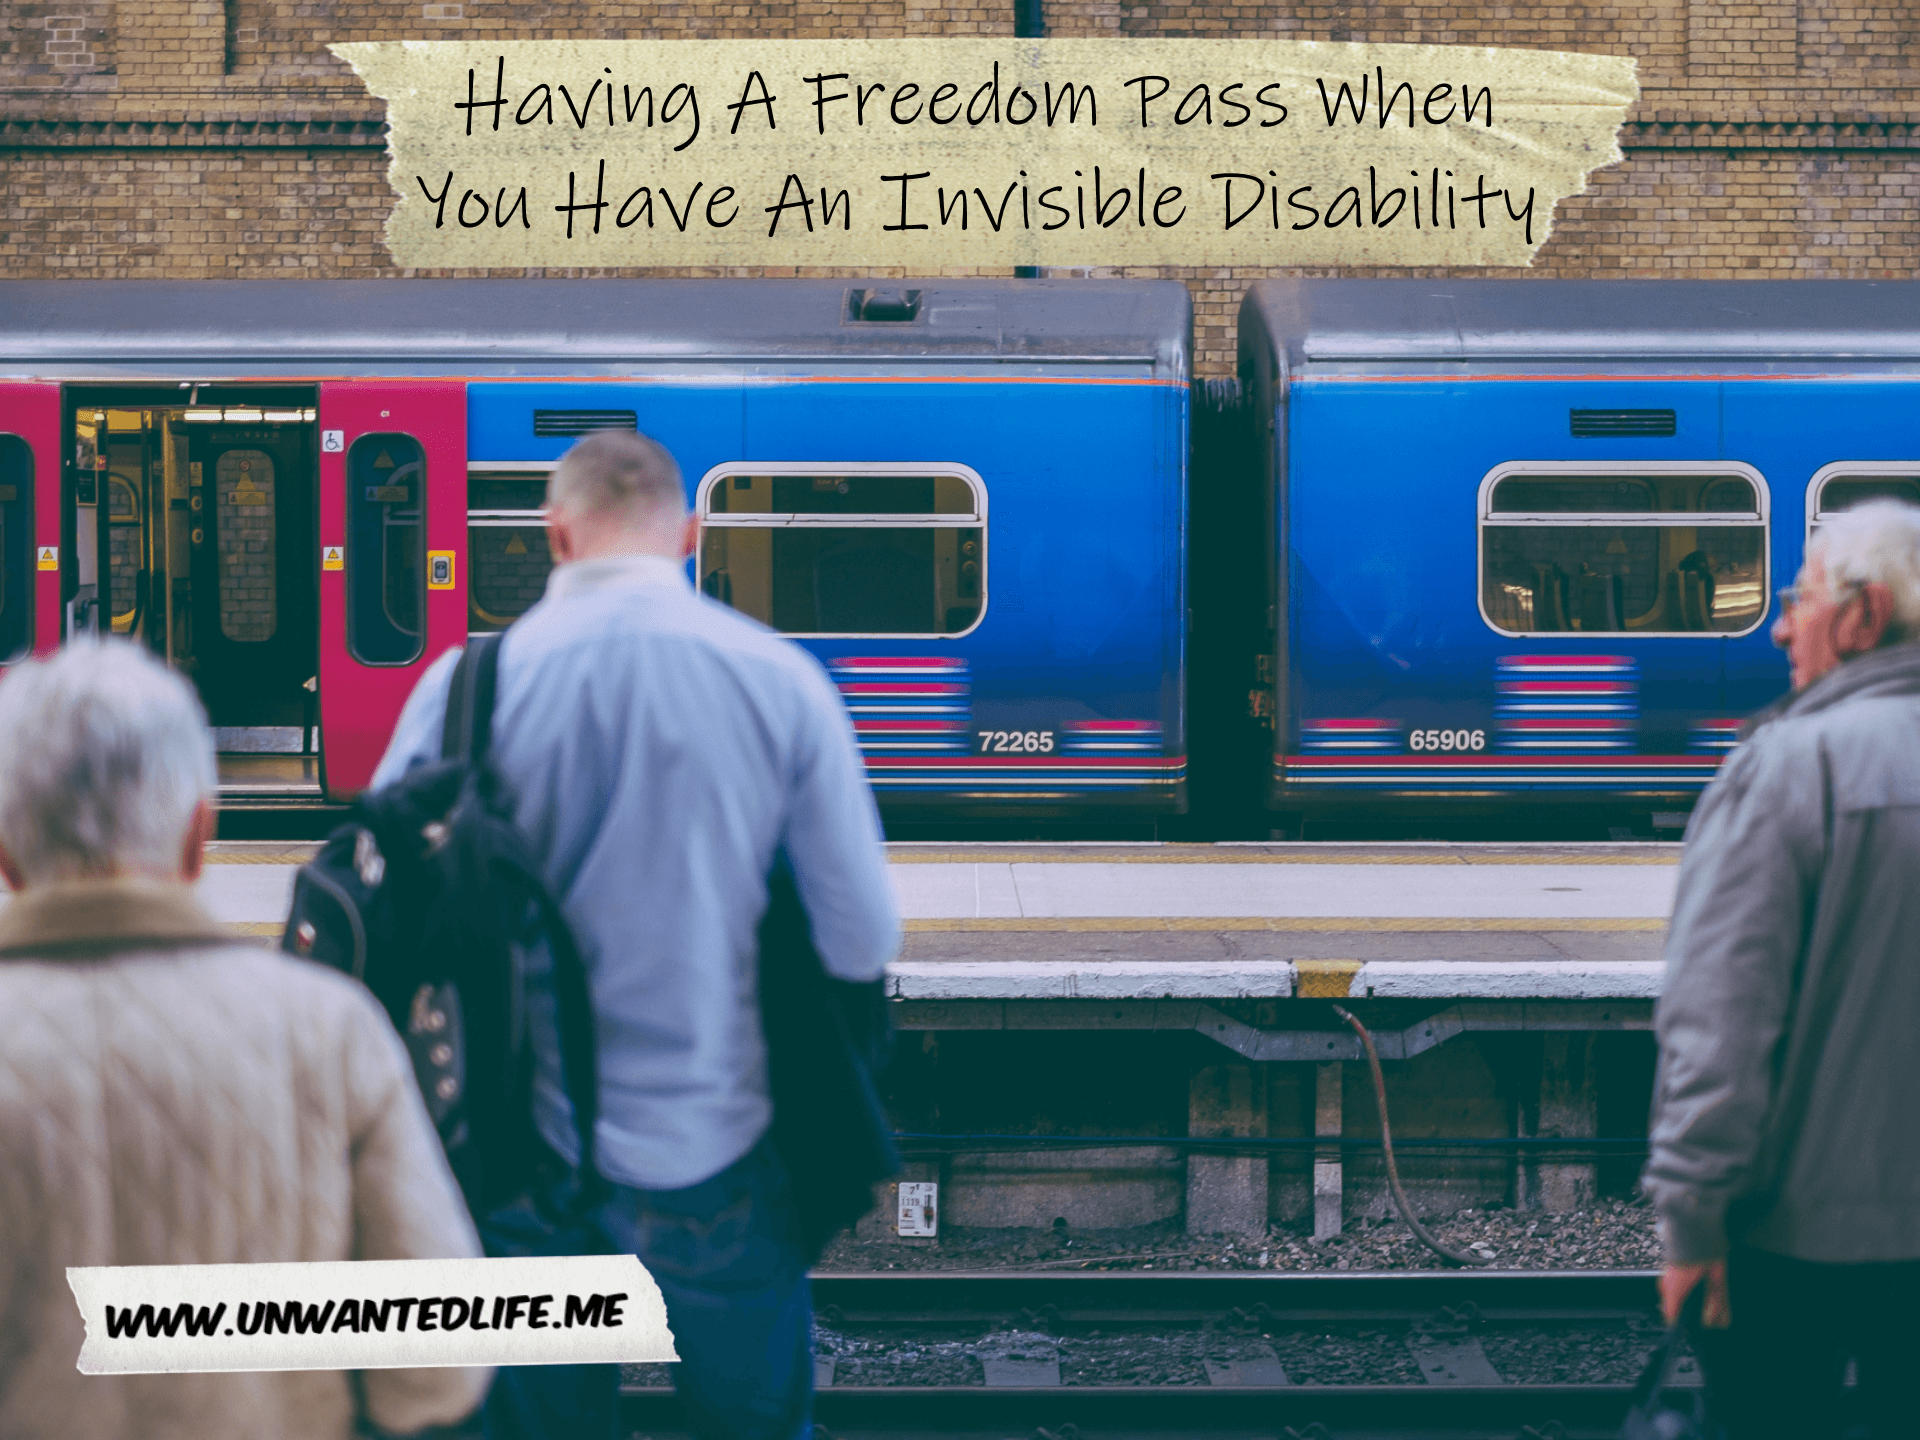 A photo of people standing at a train platform with a train stopped at the next platform over with the title of the article - Having A Freedom Pass When You Have An Invisible Disability - across the top of the image